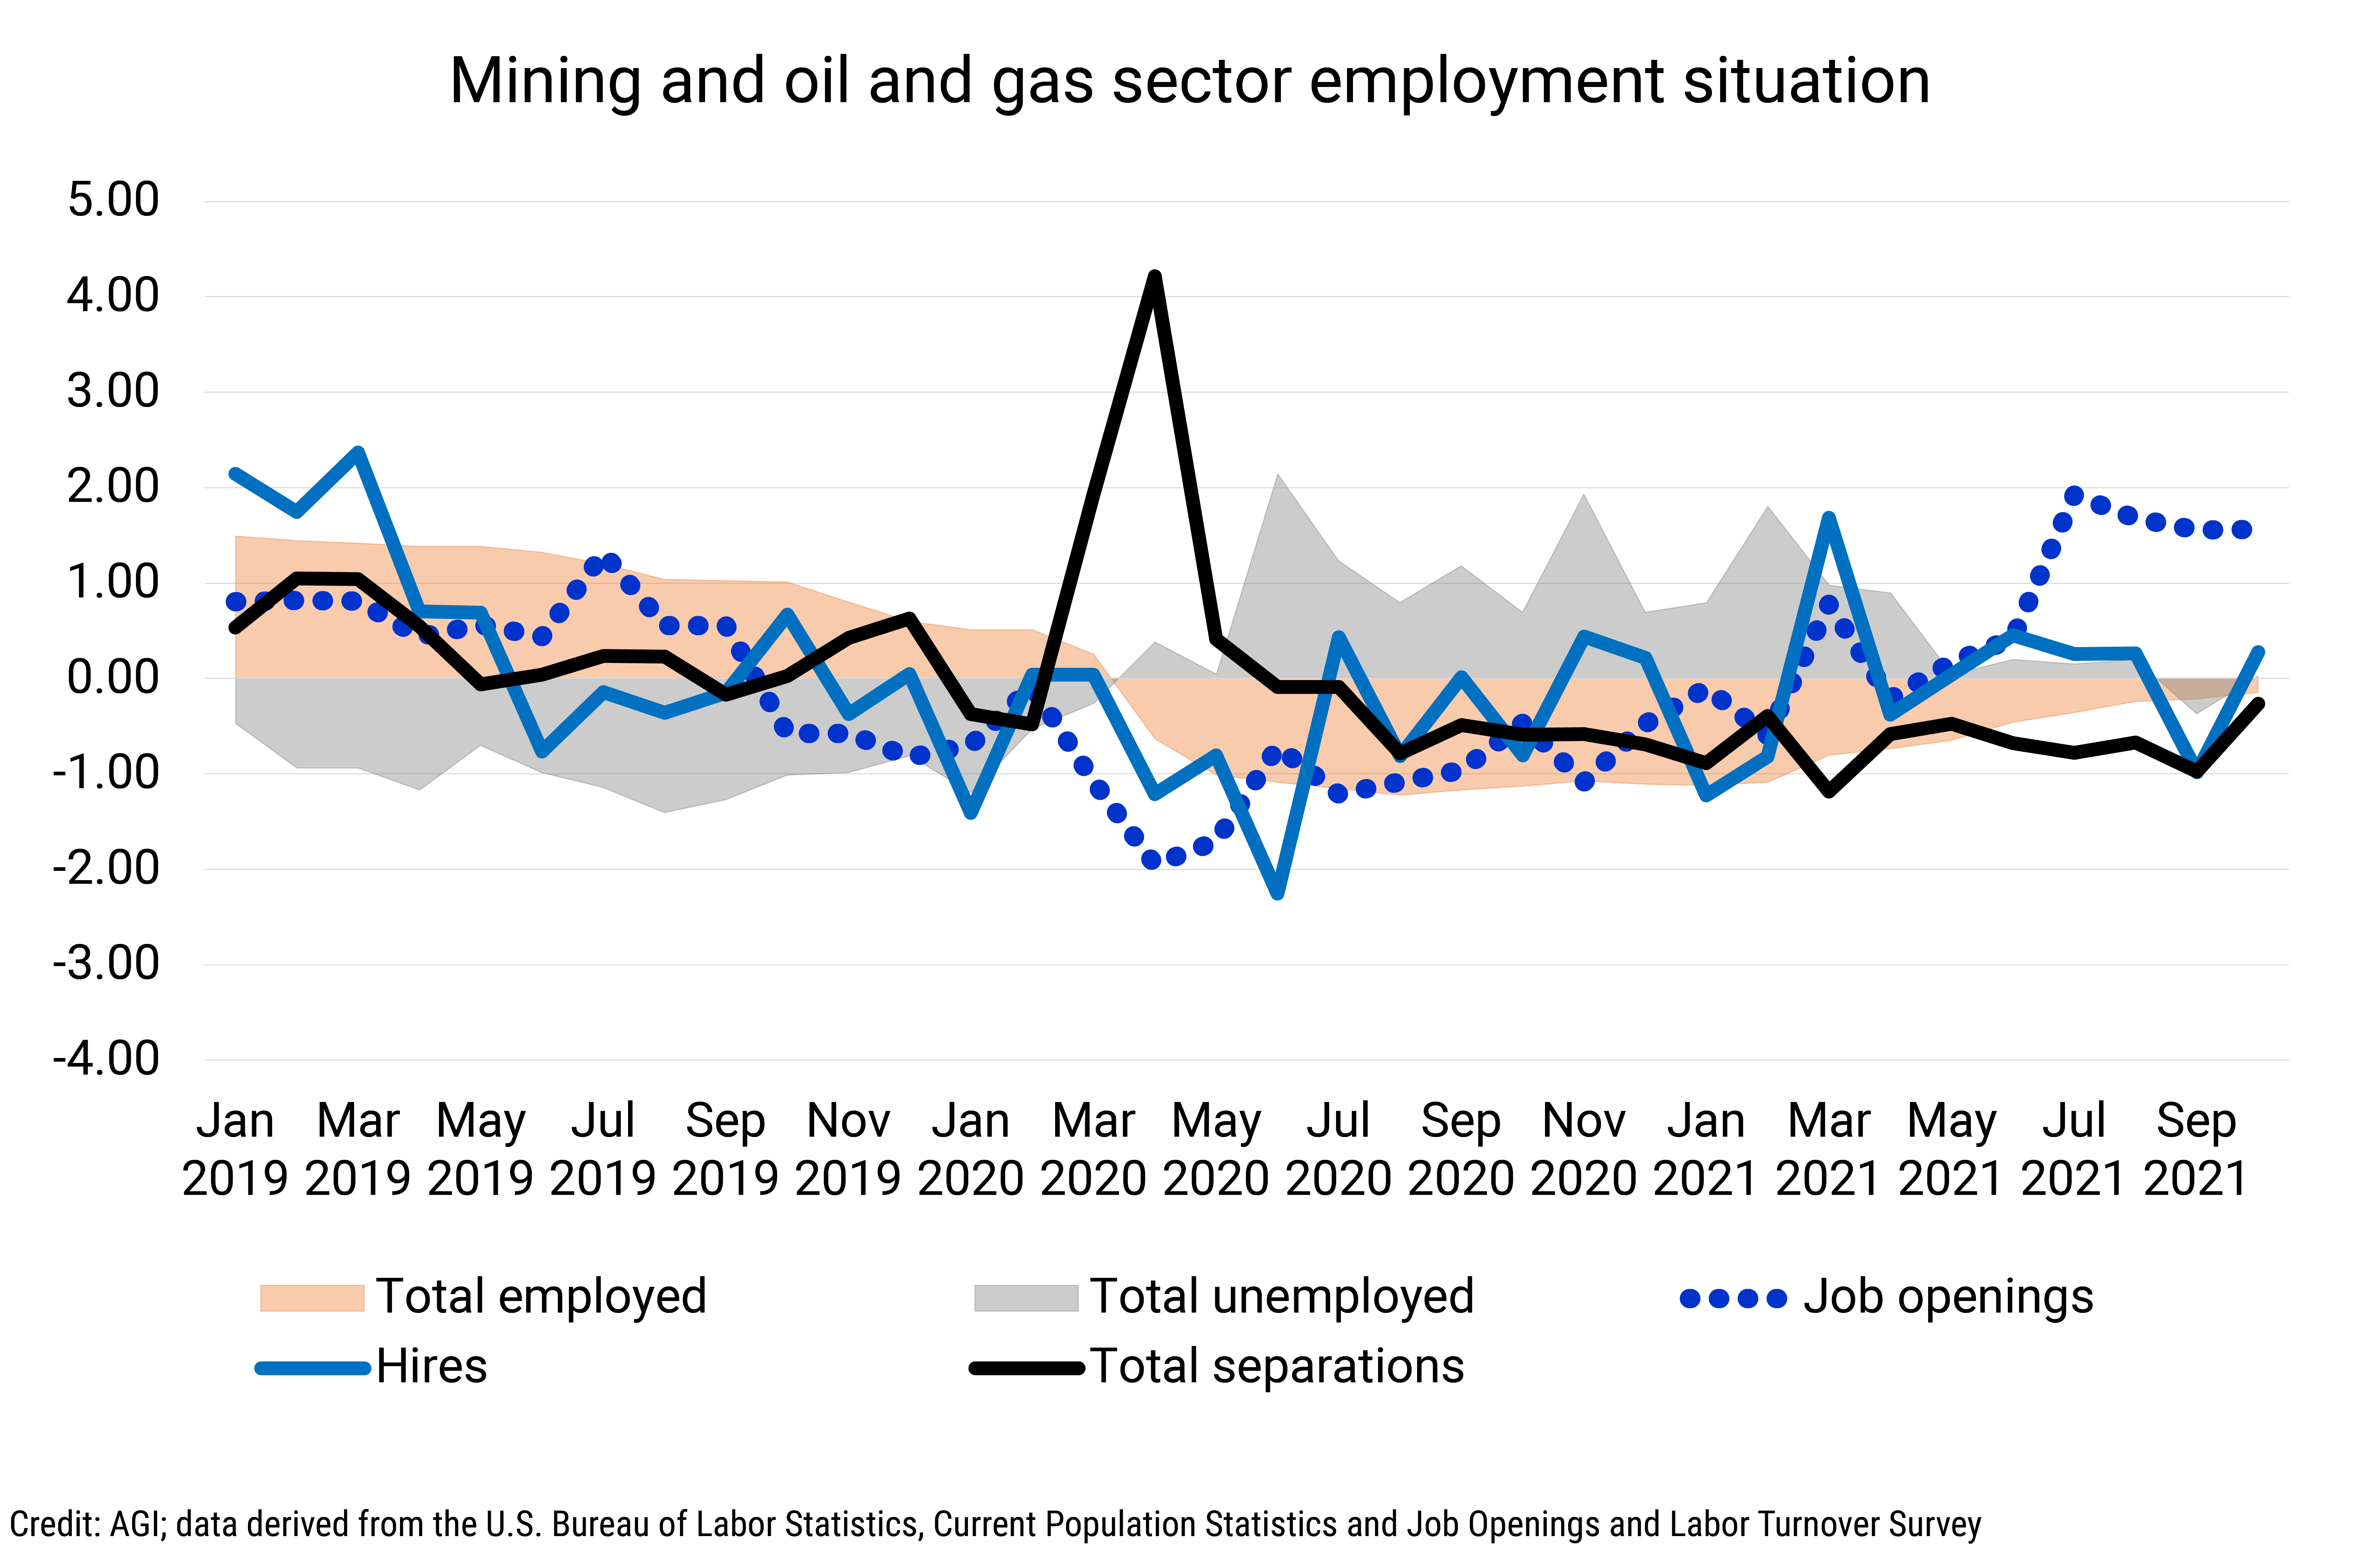 DB_2022-001 chart 07: Mining and oil and gas sector employment situation (Credit: AGI; data derived from the U.S. Bureau of Labor Statistics, Current Population Statistics and Job Openings and Labor Turnover Survey)